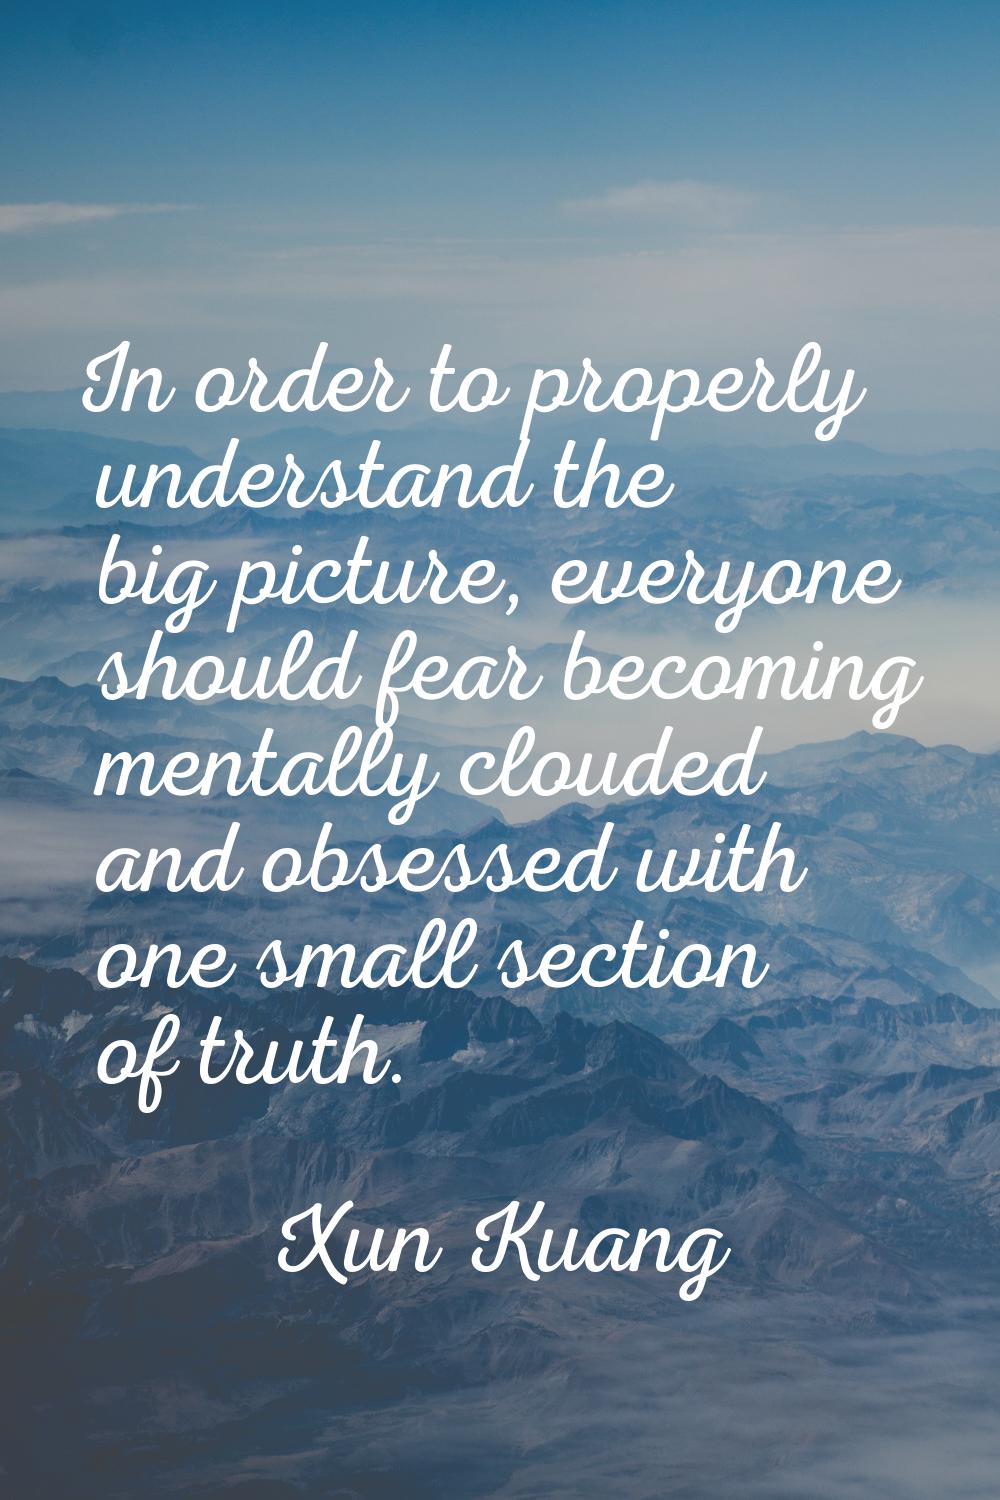 In order to properly understand the big picture, everyone should fear becoming mentally clouded and